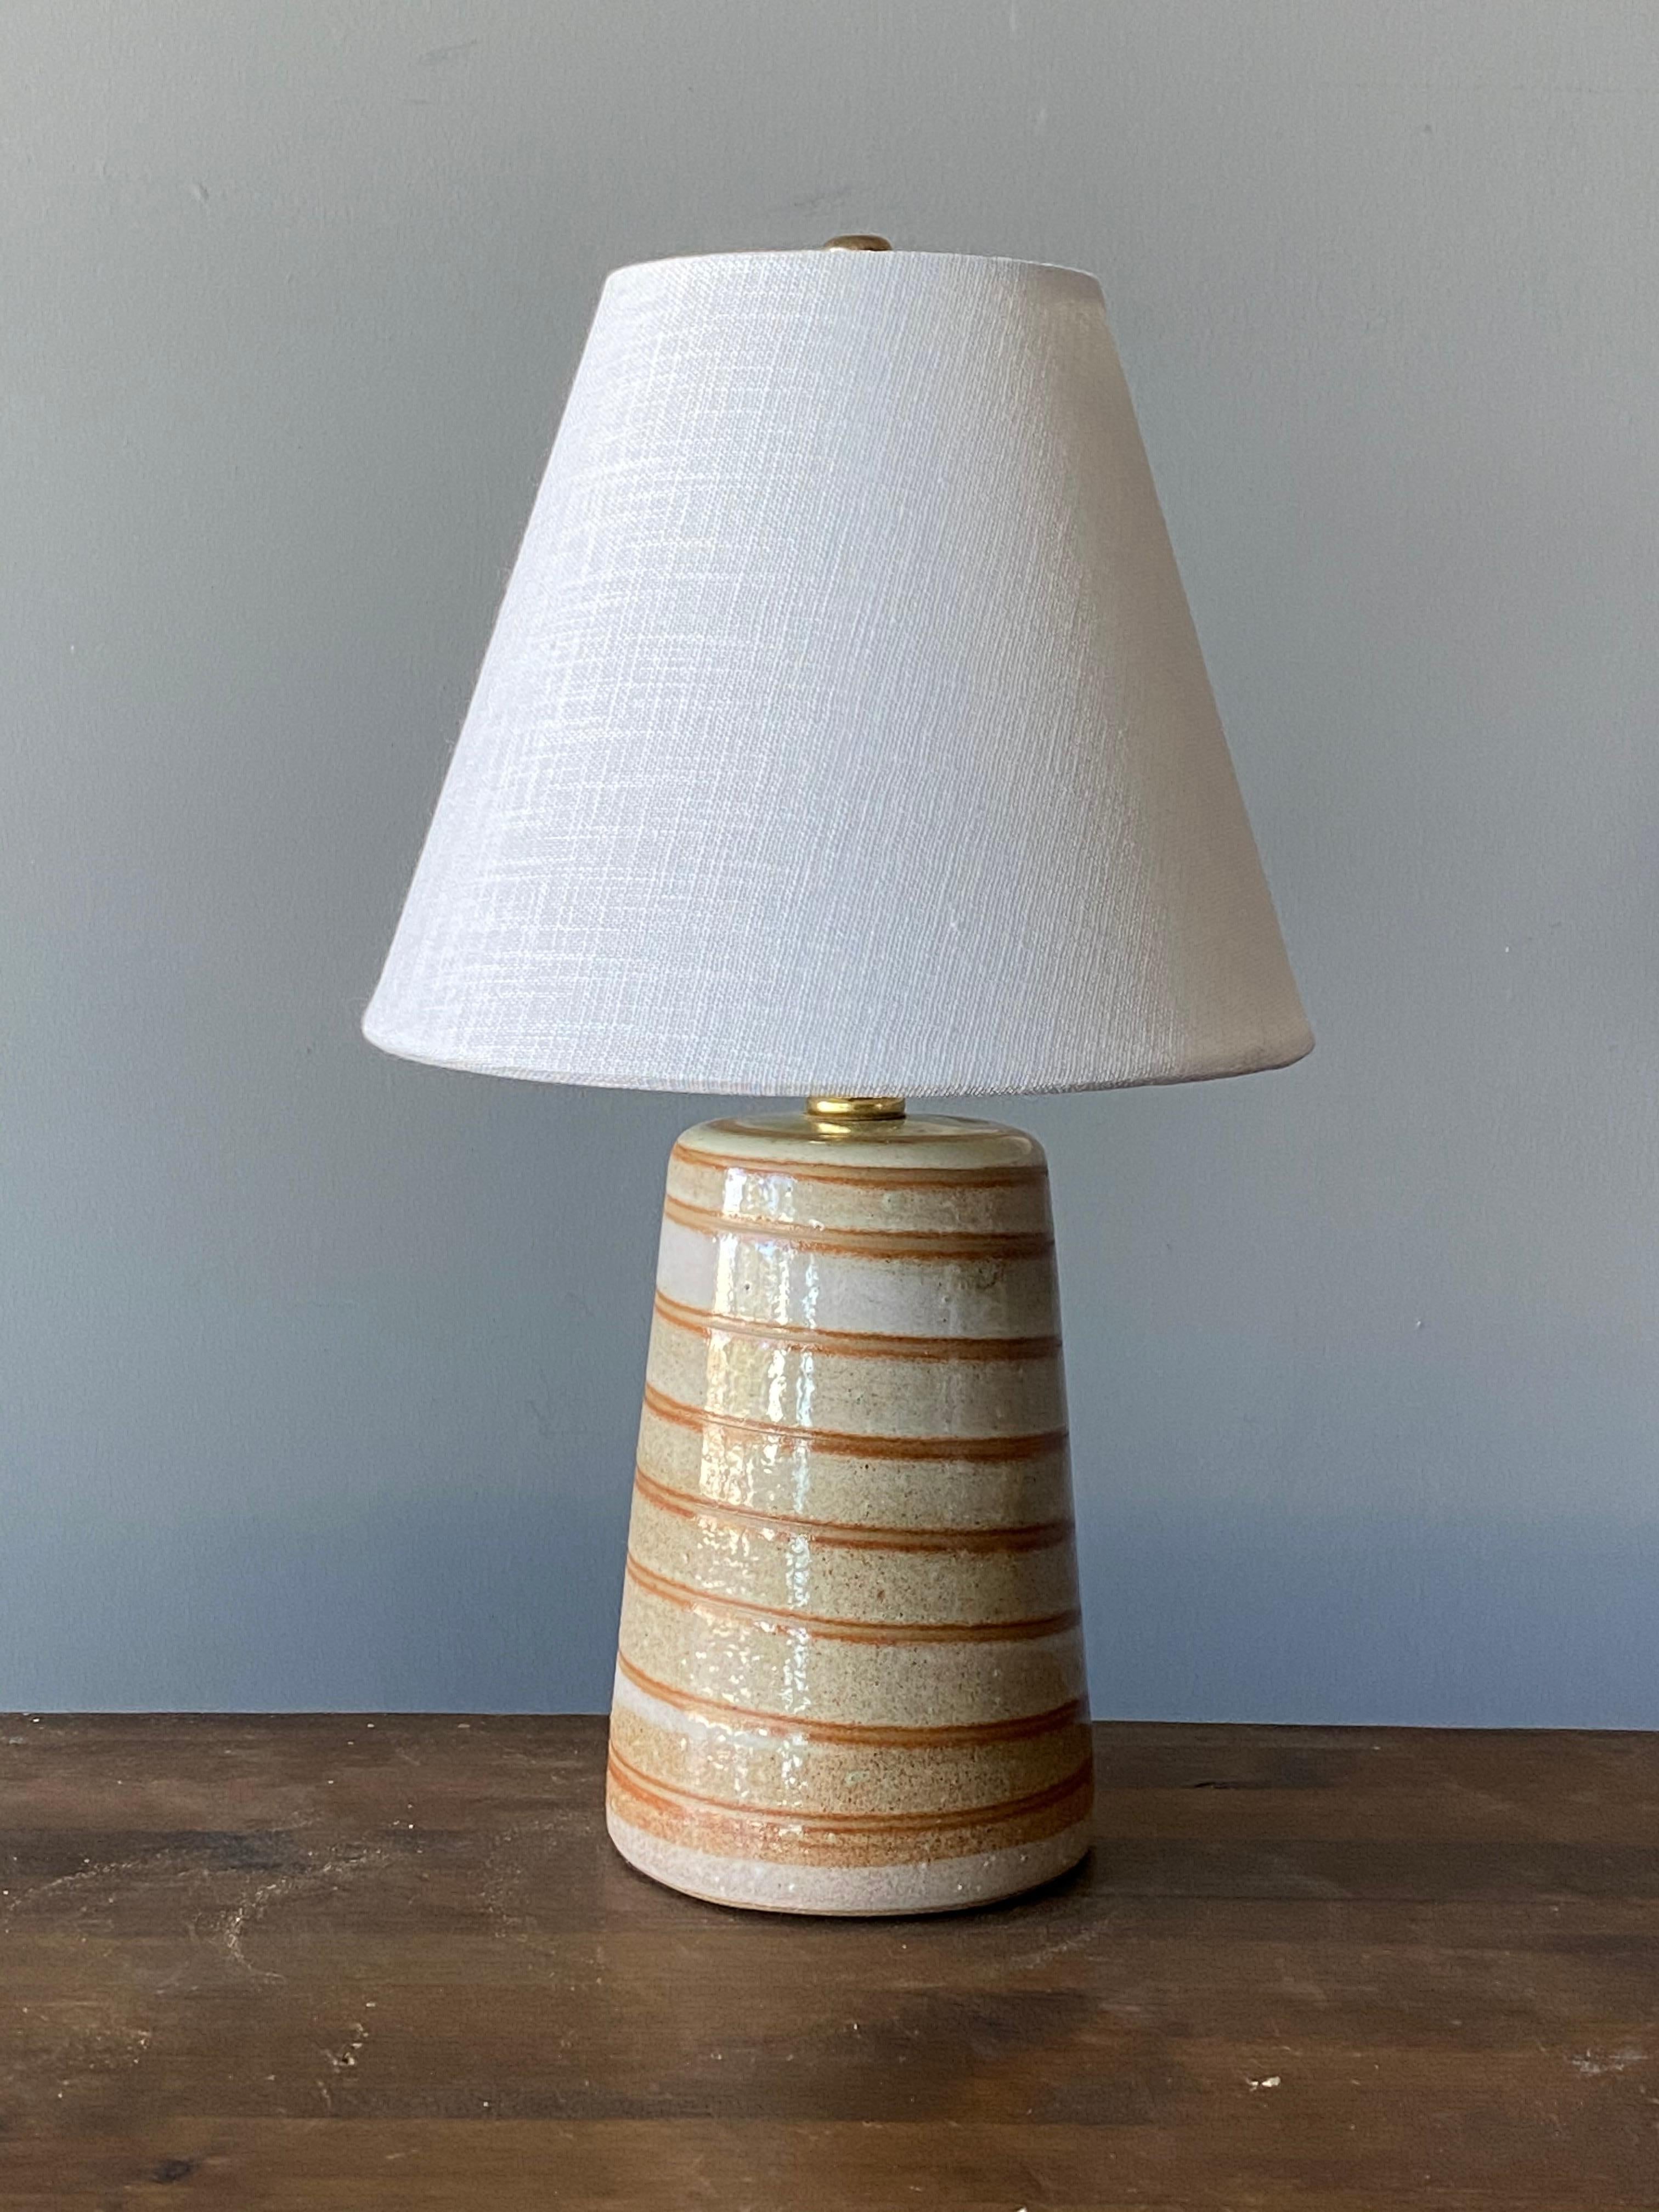 A table lamp designed by husband and wife duo Jane & Gordon Martz. Produced by Marshall Studios, Indianapolis.

The base is slip-cast and then dipped into glaze and hand painted. Base is signed.

Lampshade on bulb-clip is not included in purchase.